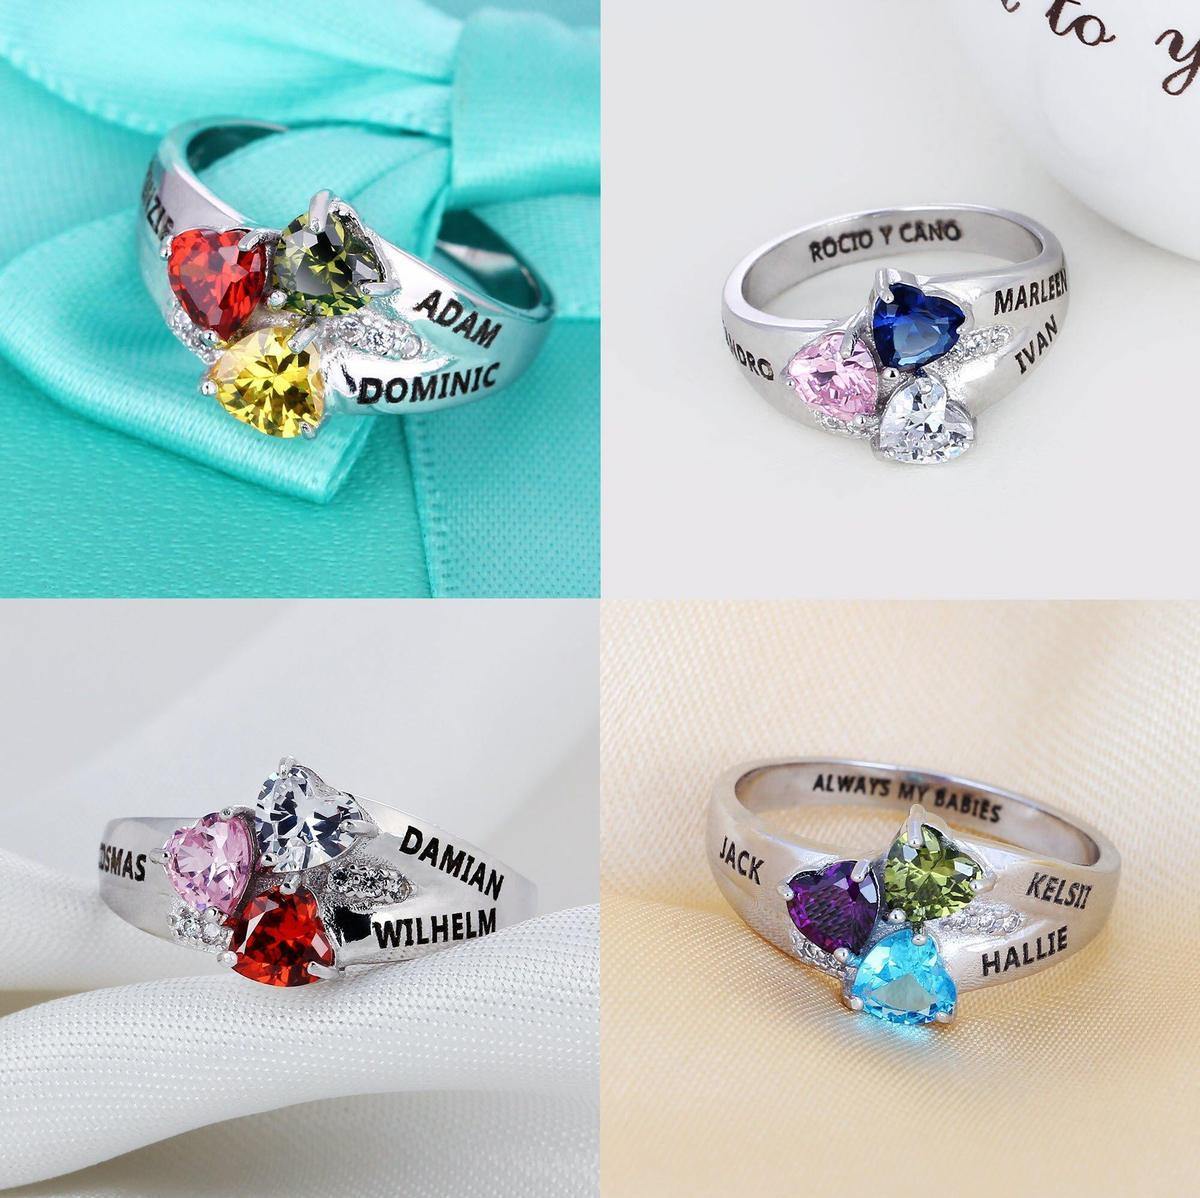 mother s ring with 3 heart birthstones rings 3 name 3 stone accents aunt family ring featured girlfriend grandma heart inside engraving memorial mom mom ring mother s ring new baby ri 6c6cef37 b6d5 482b 9927 24dba6b189aa